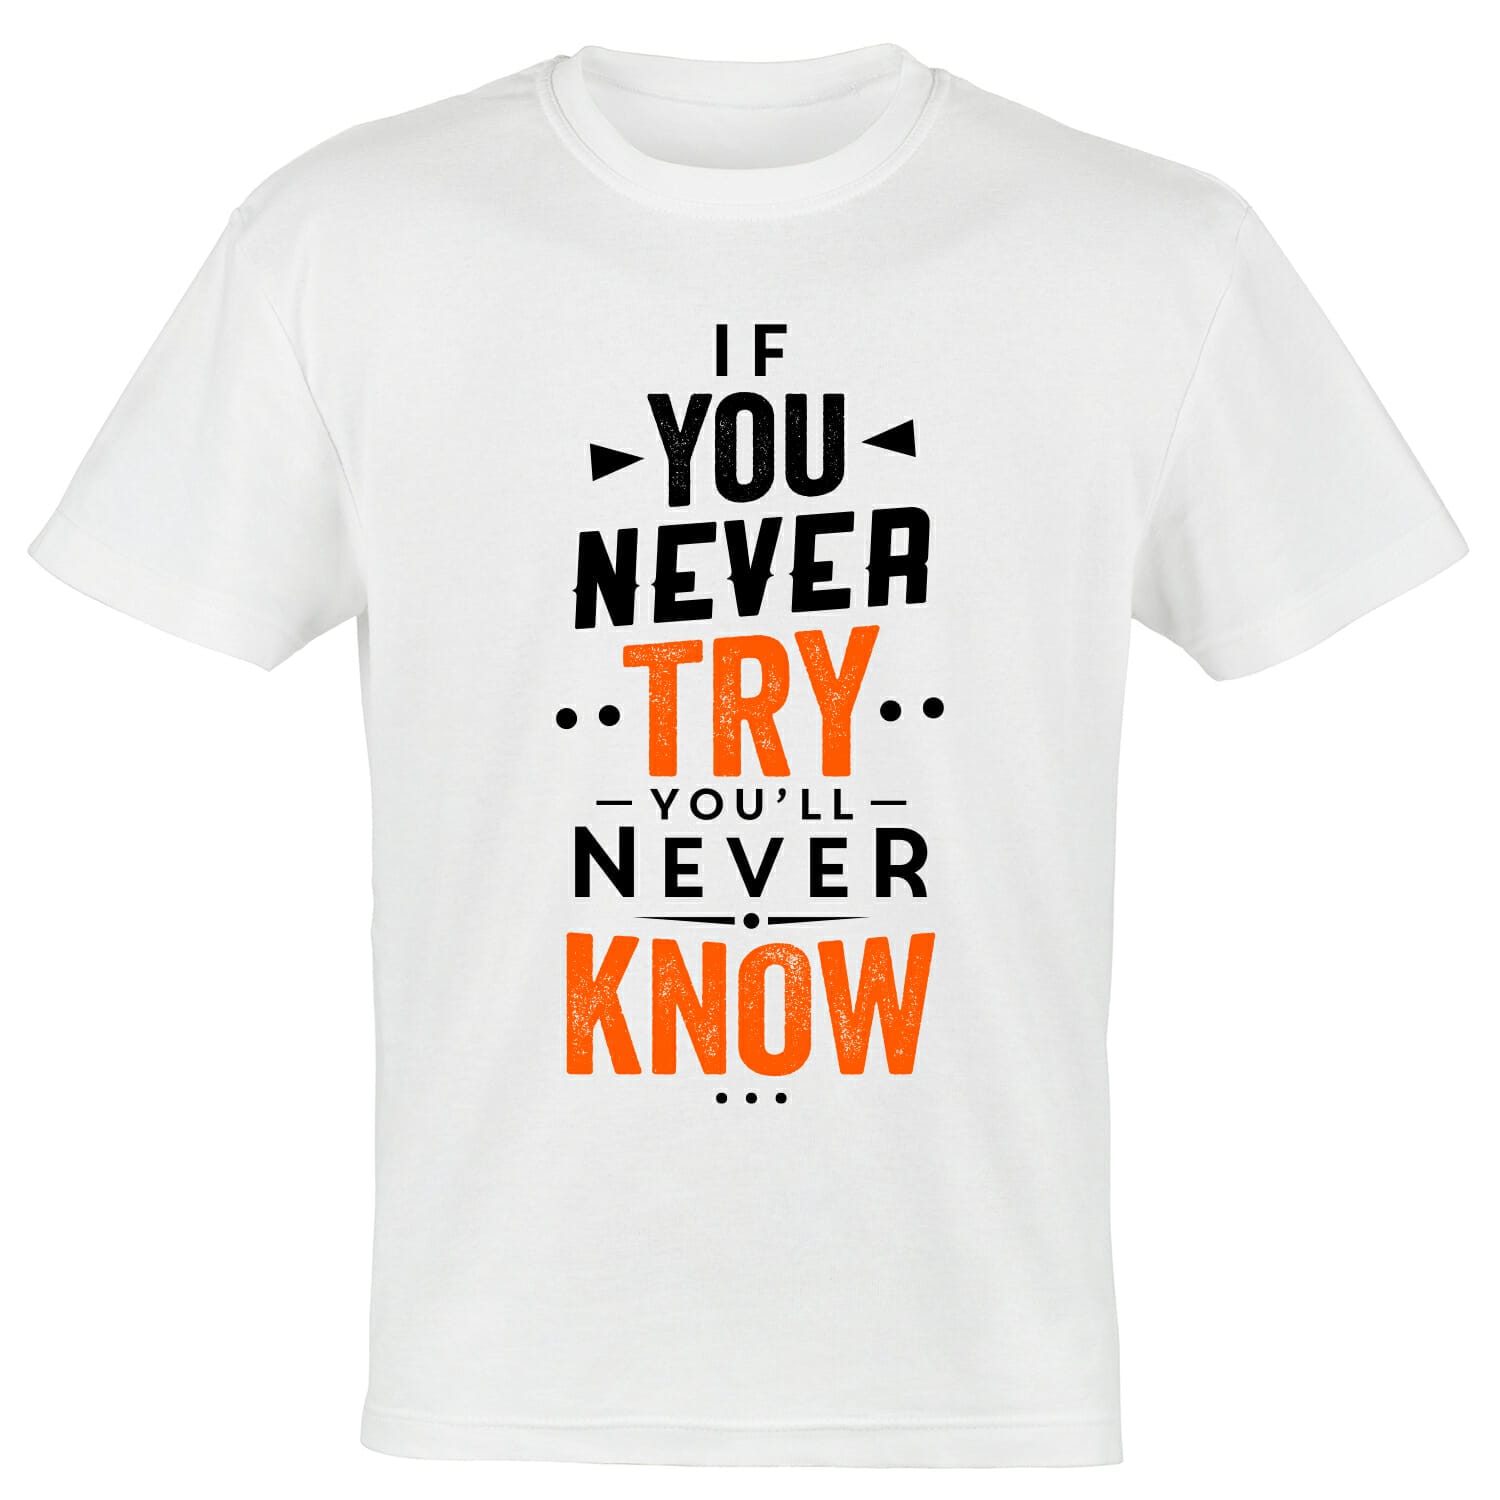 IF-YOU-NEVER-TRY-YOU'LL-NEVER-KNOW-tshirt-design